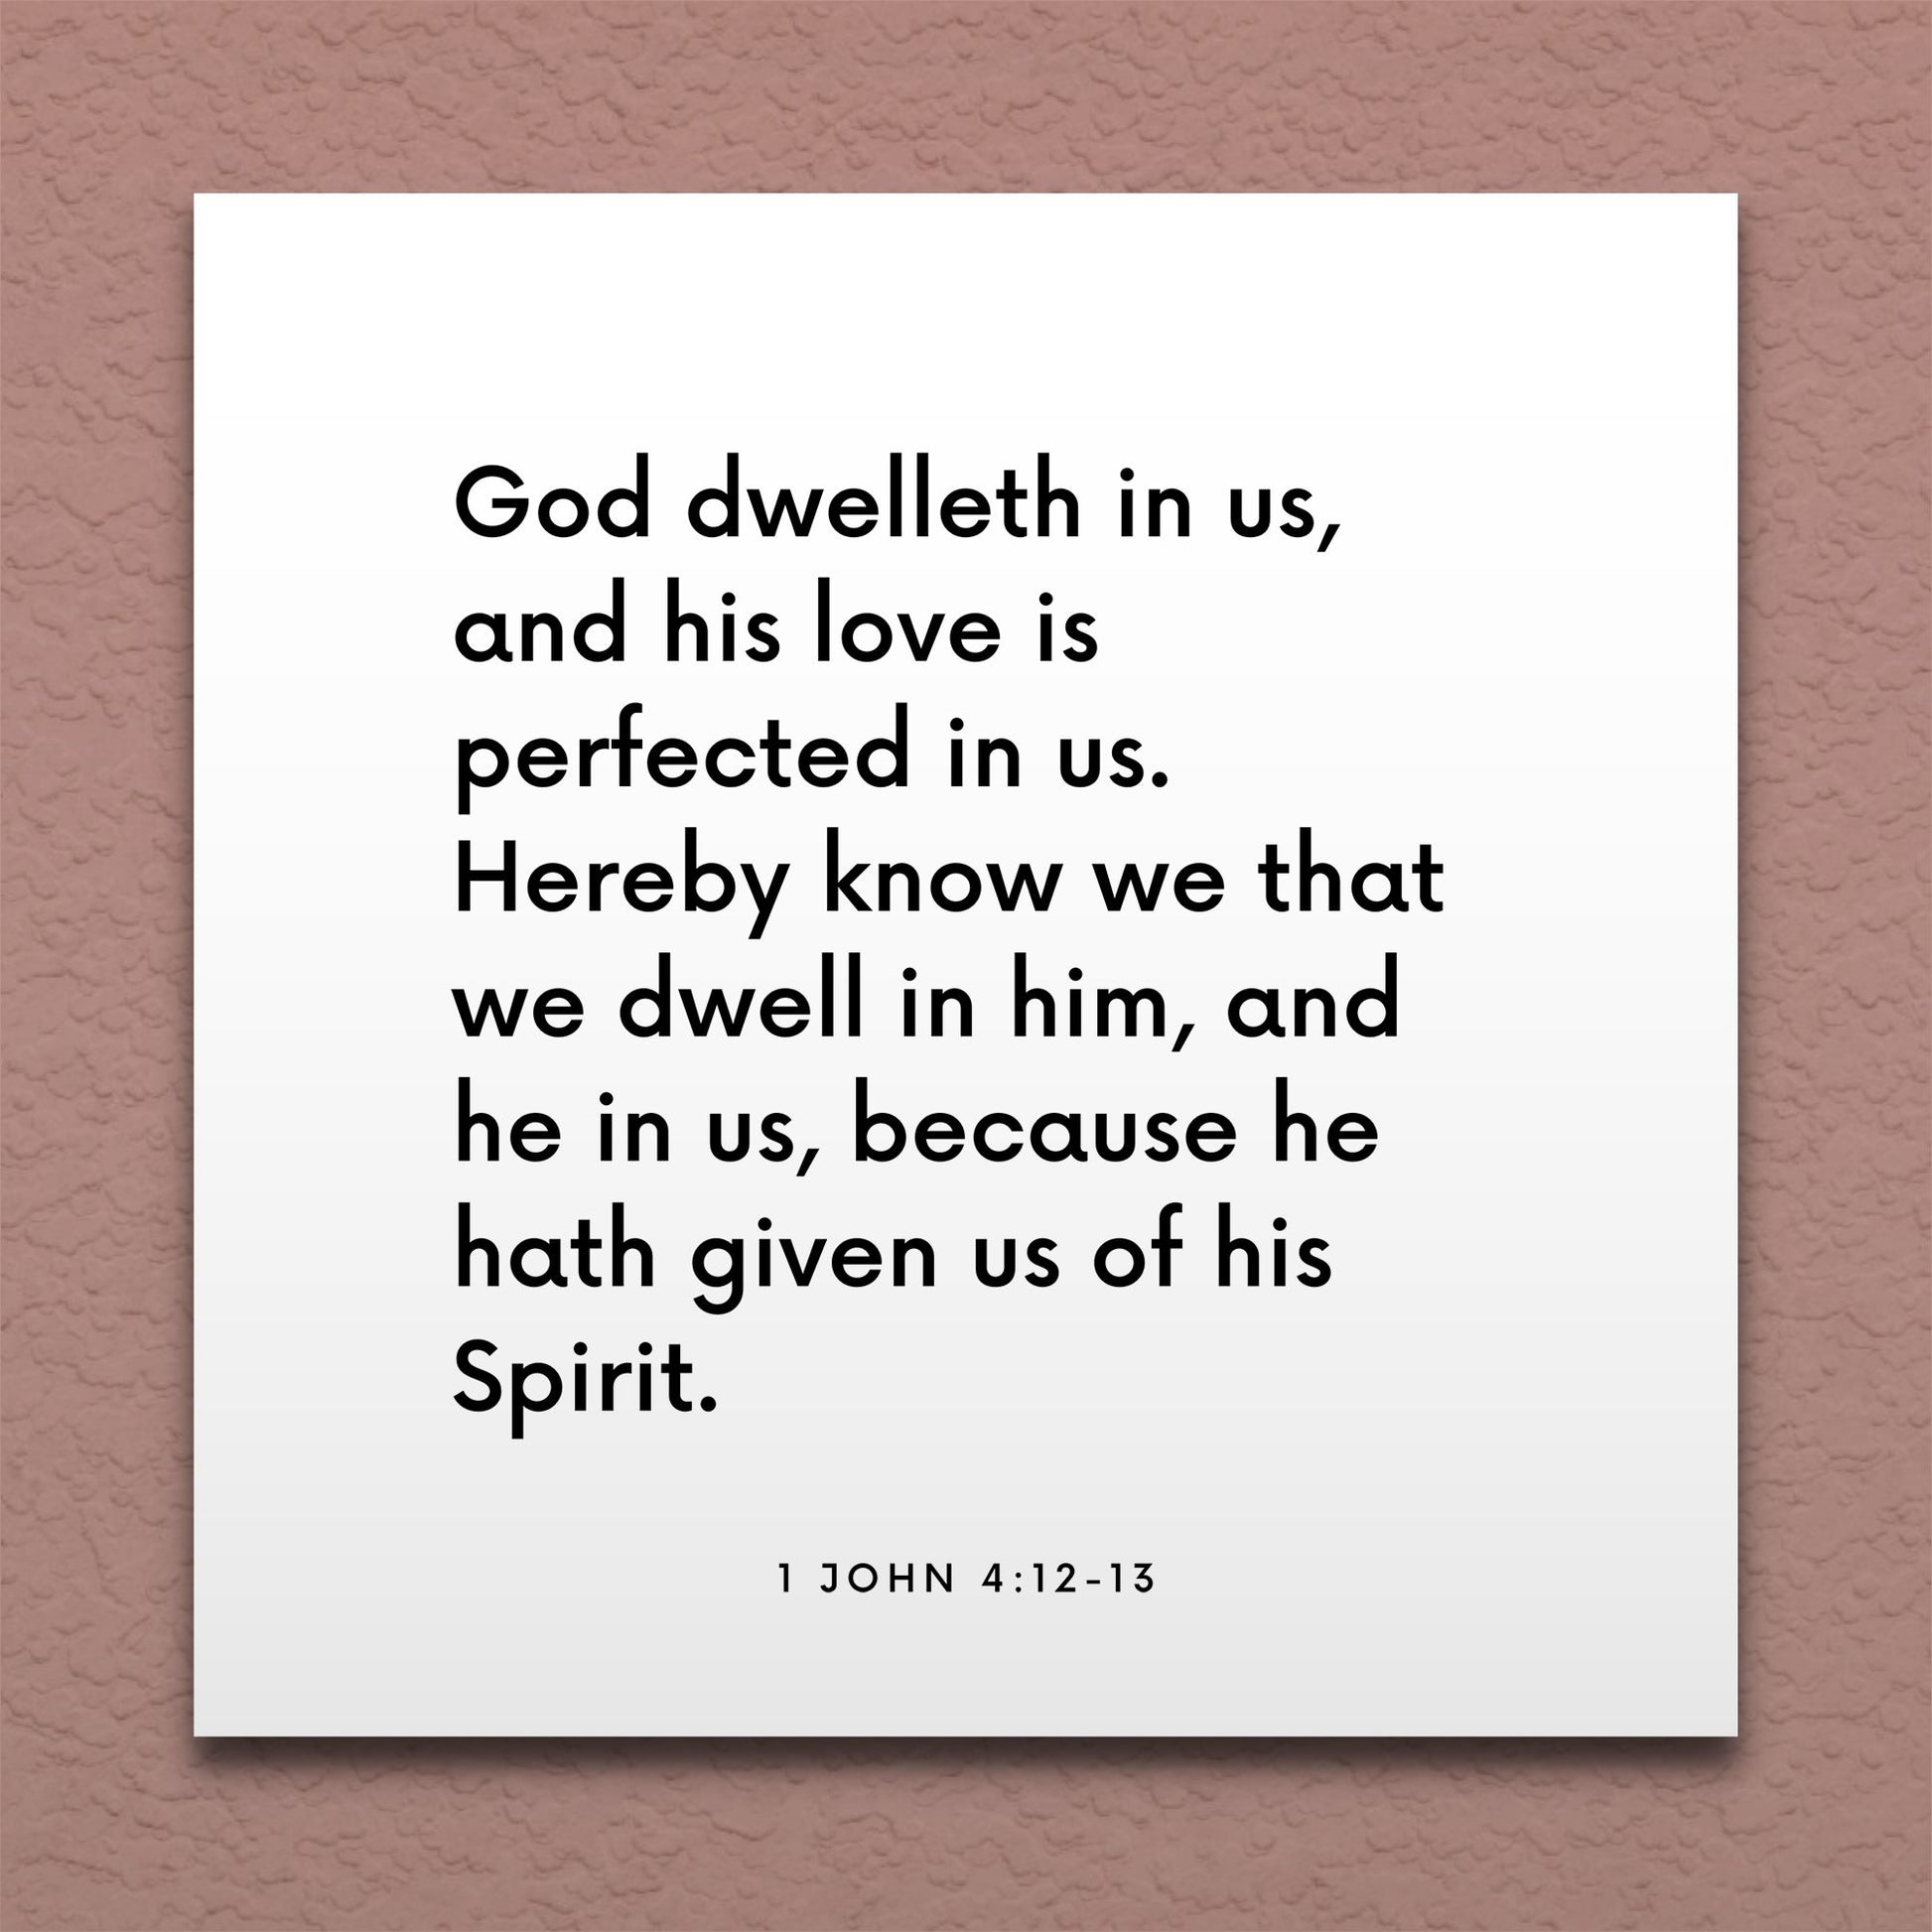 Wall-mounted scripture tile for 1 John 4:12-13 - "Hereby know we that we dwell in him"